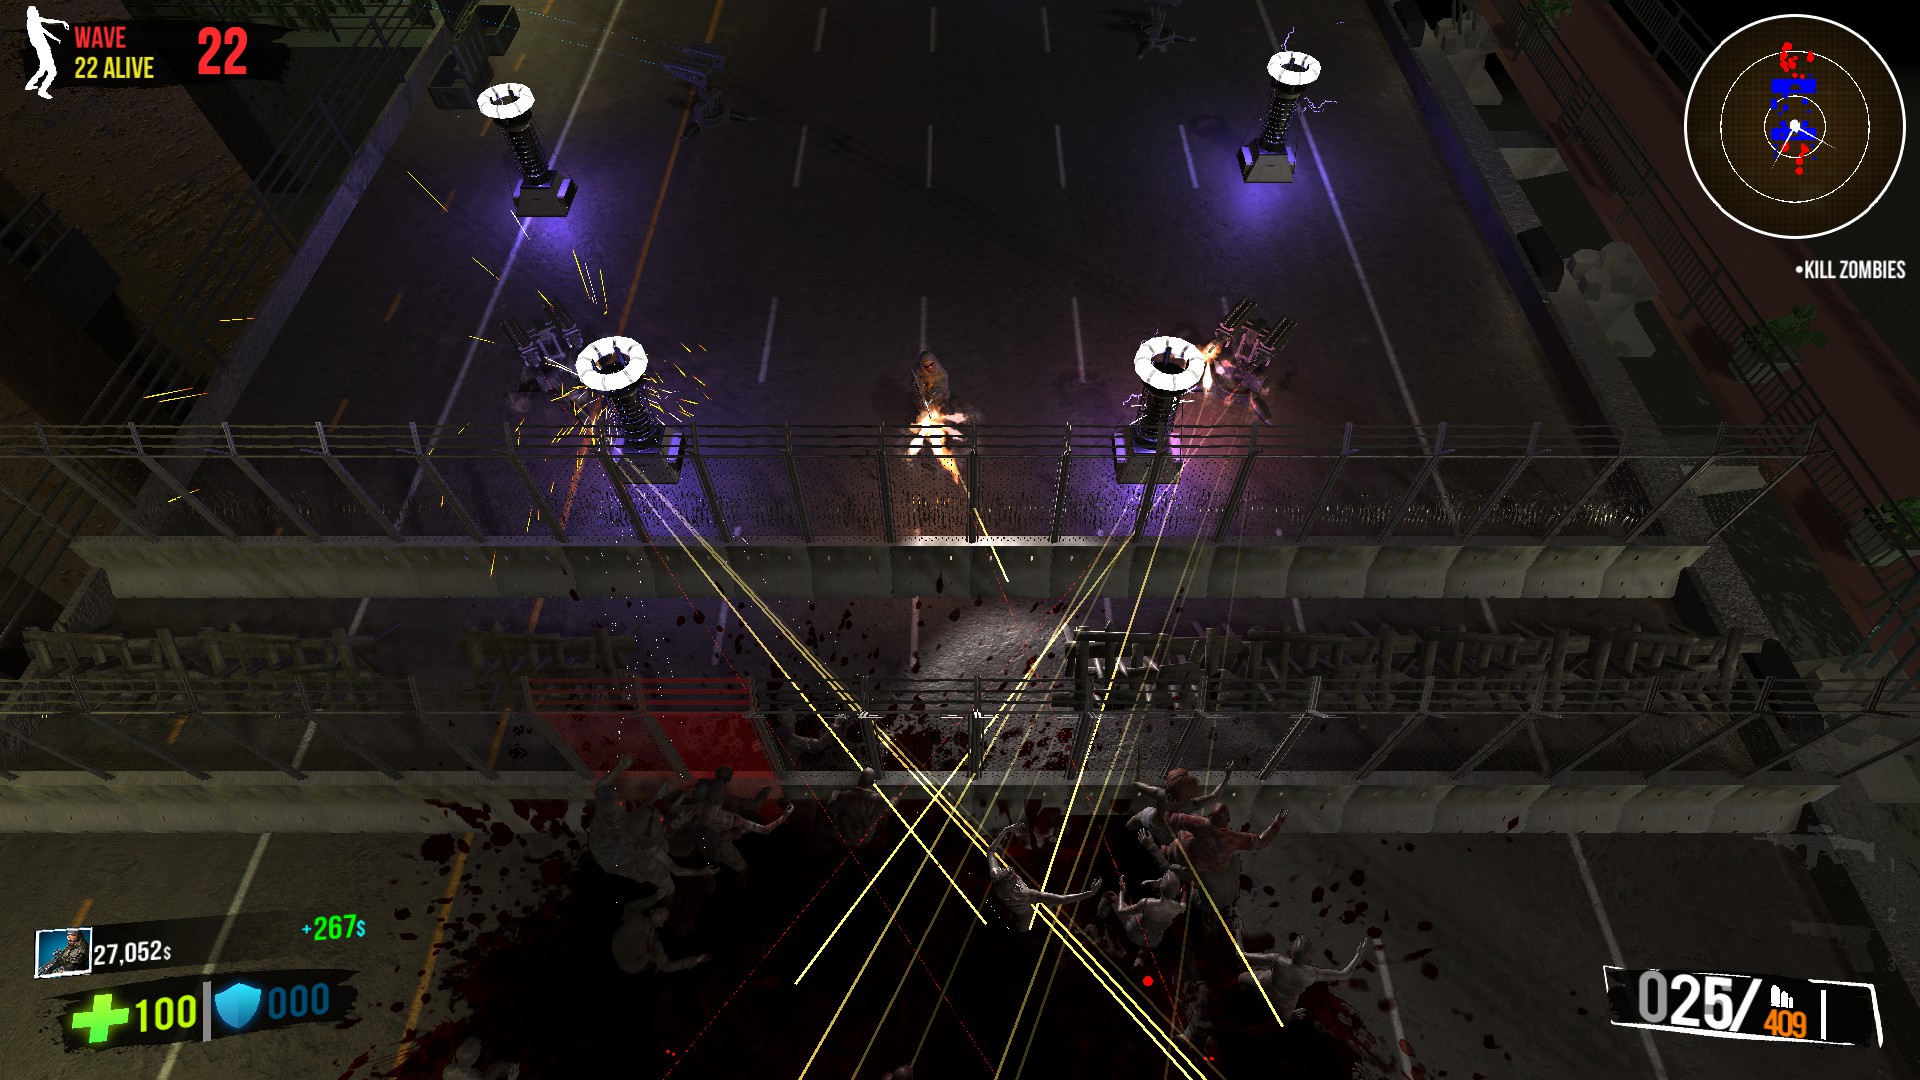 A defence has been built, a horde of zombies are below trying to reach the player. Two turrets and four electrical towers can be seen.